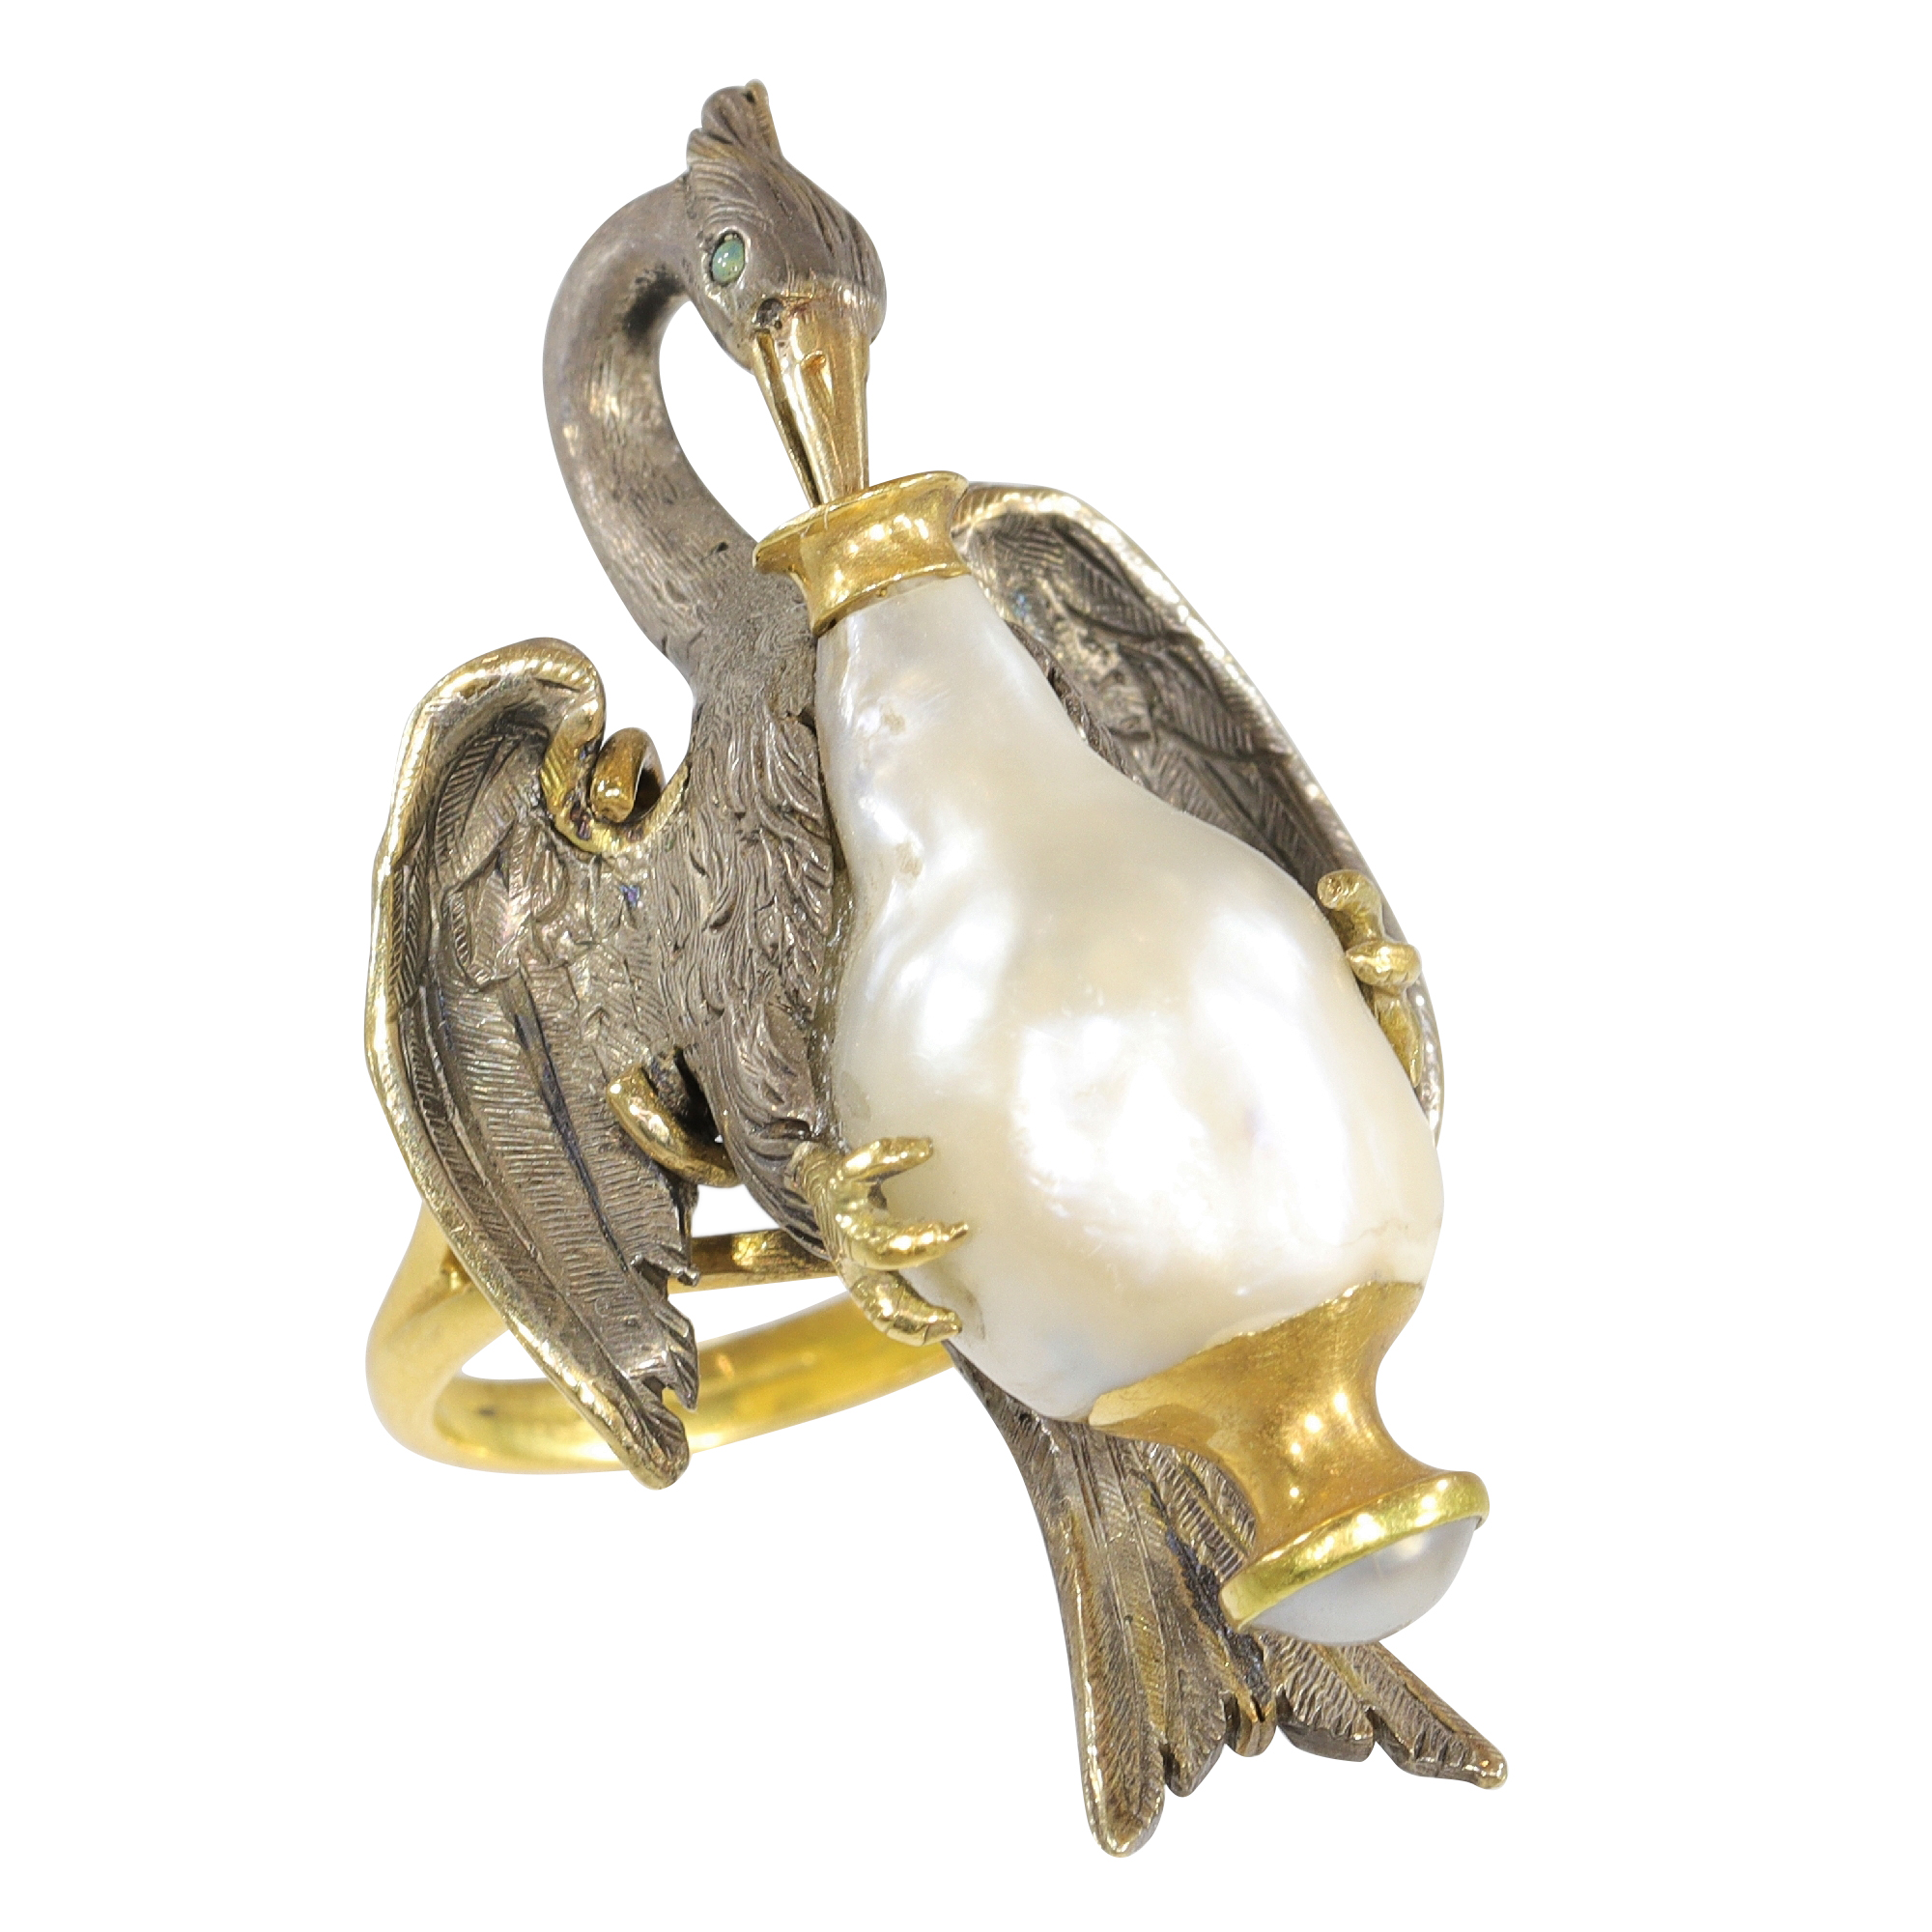 L Art du Fable: 18K Gold Stork and Pearl Ring from Victorian France